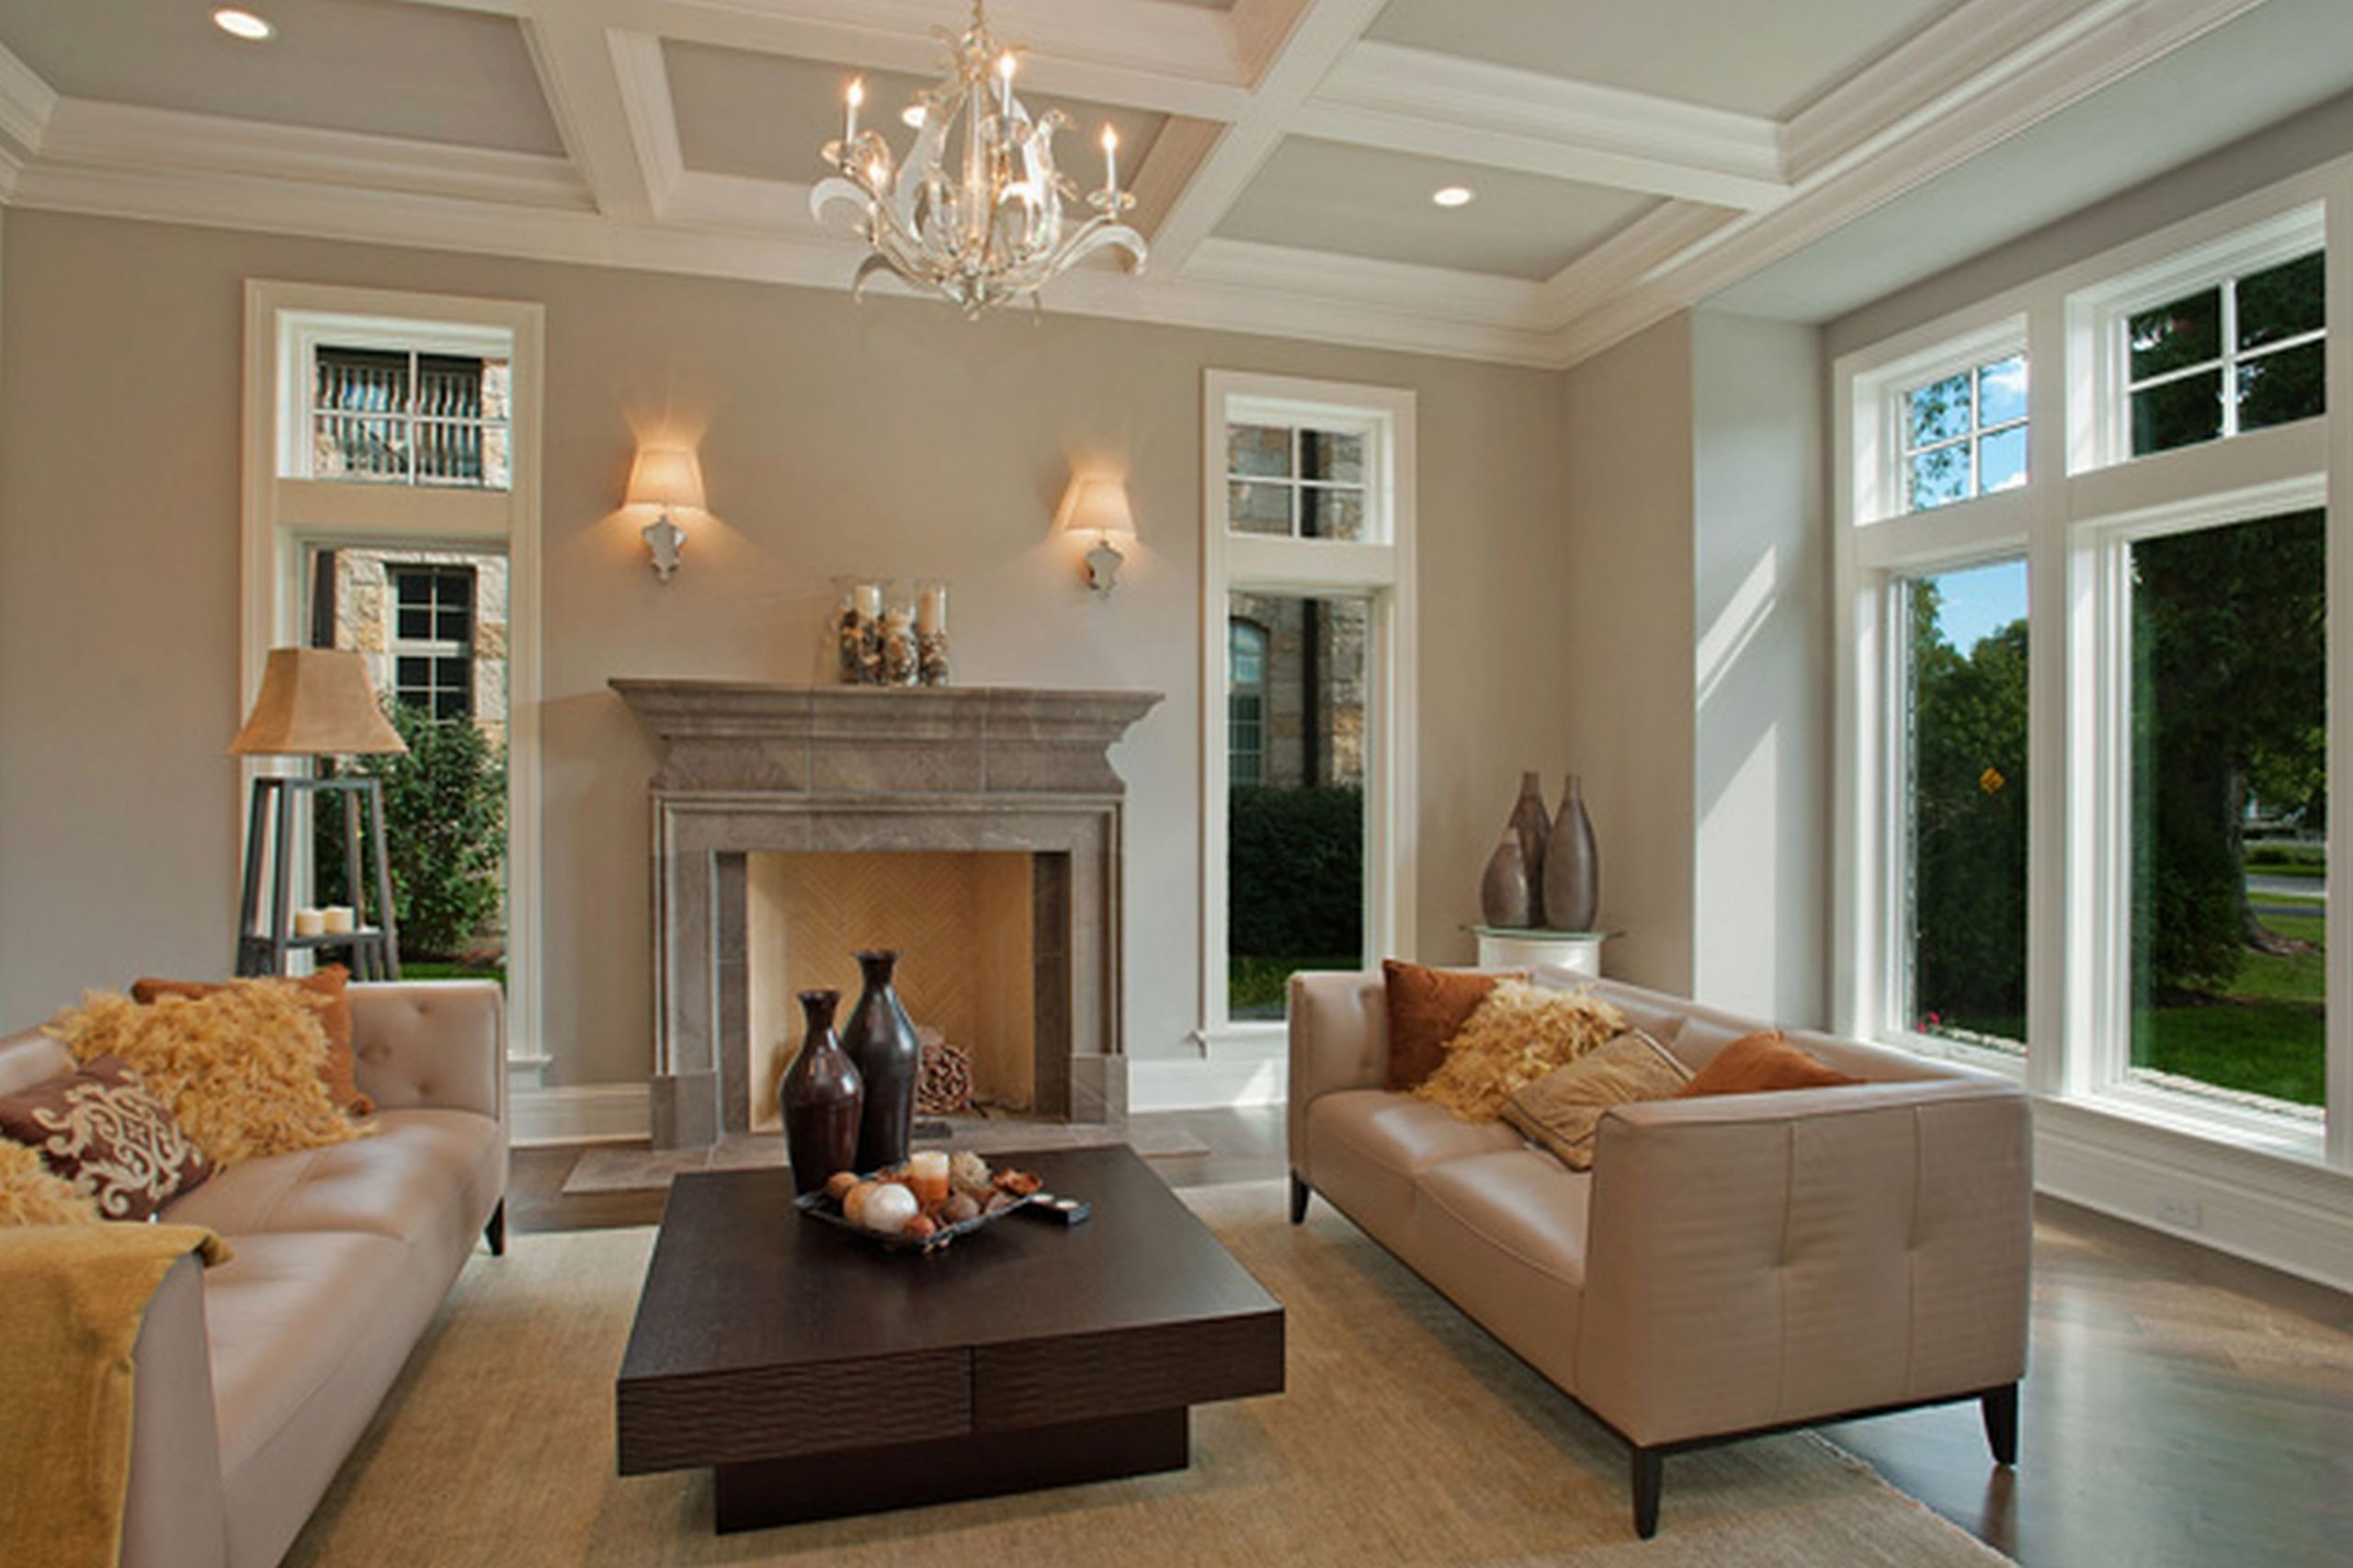 Livingroom Paint Colors
 Neutral Paint Colors For Living Room A Perfect For Home s